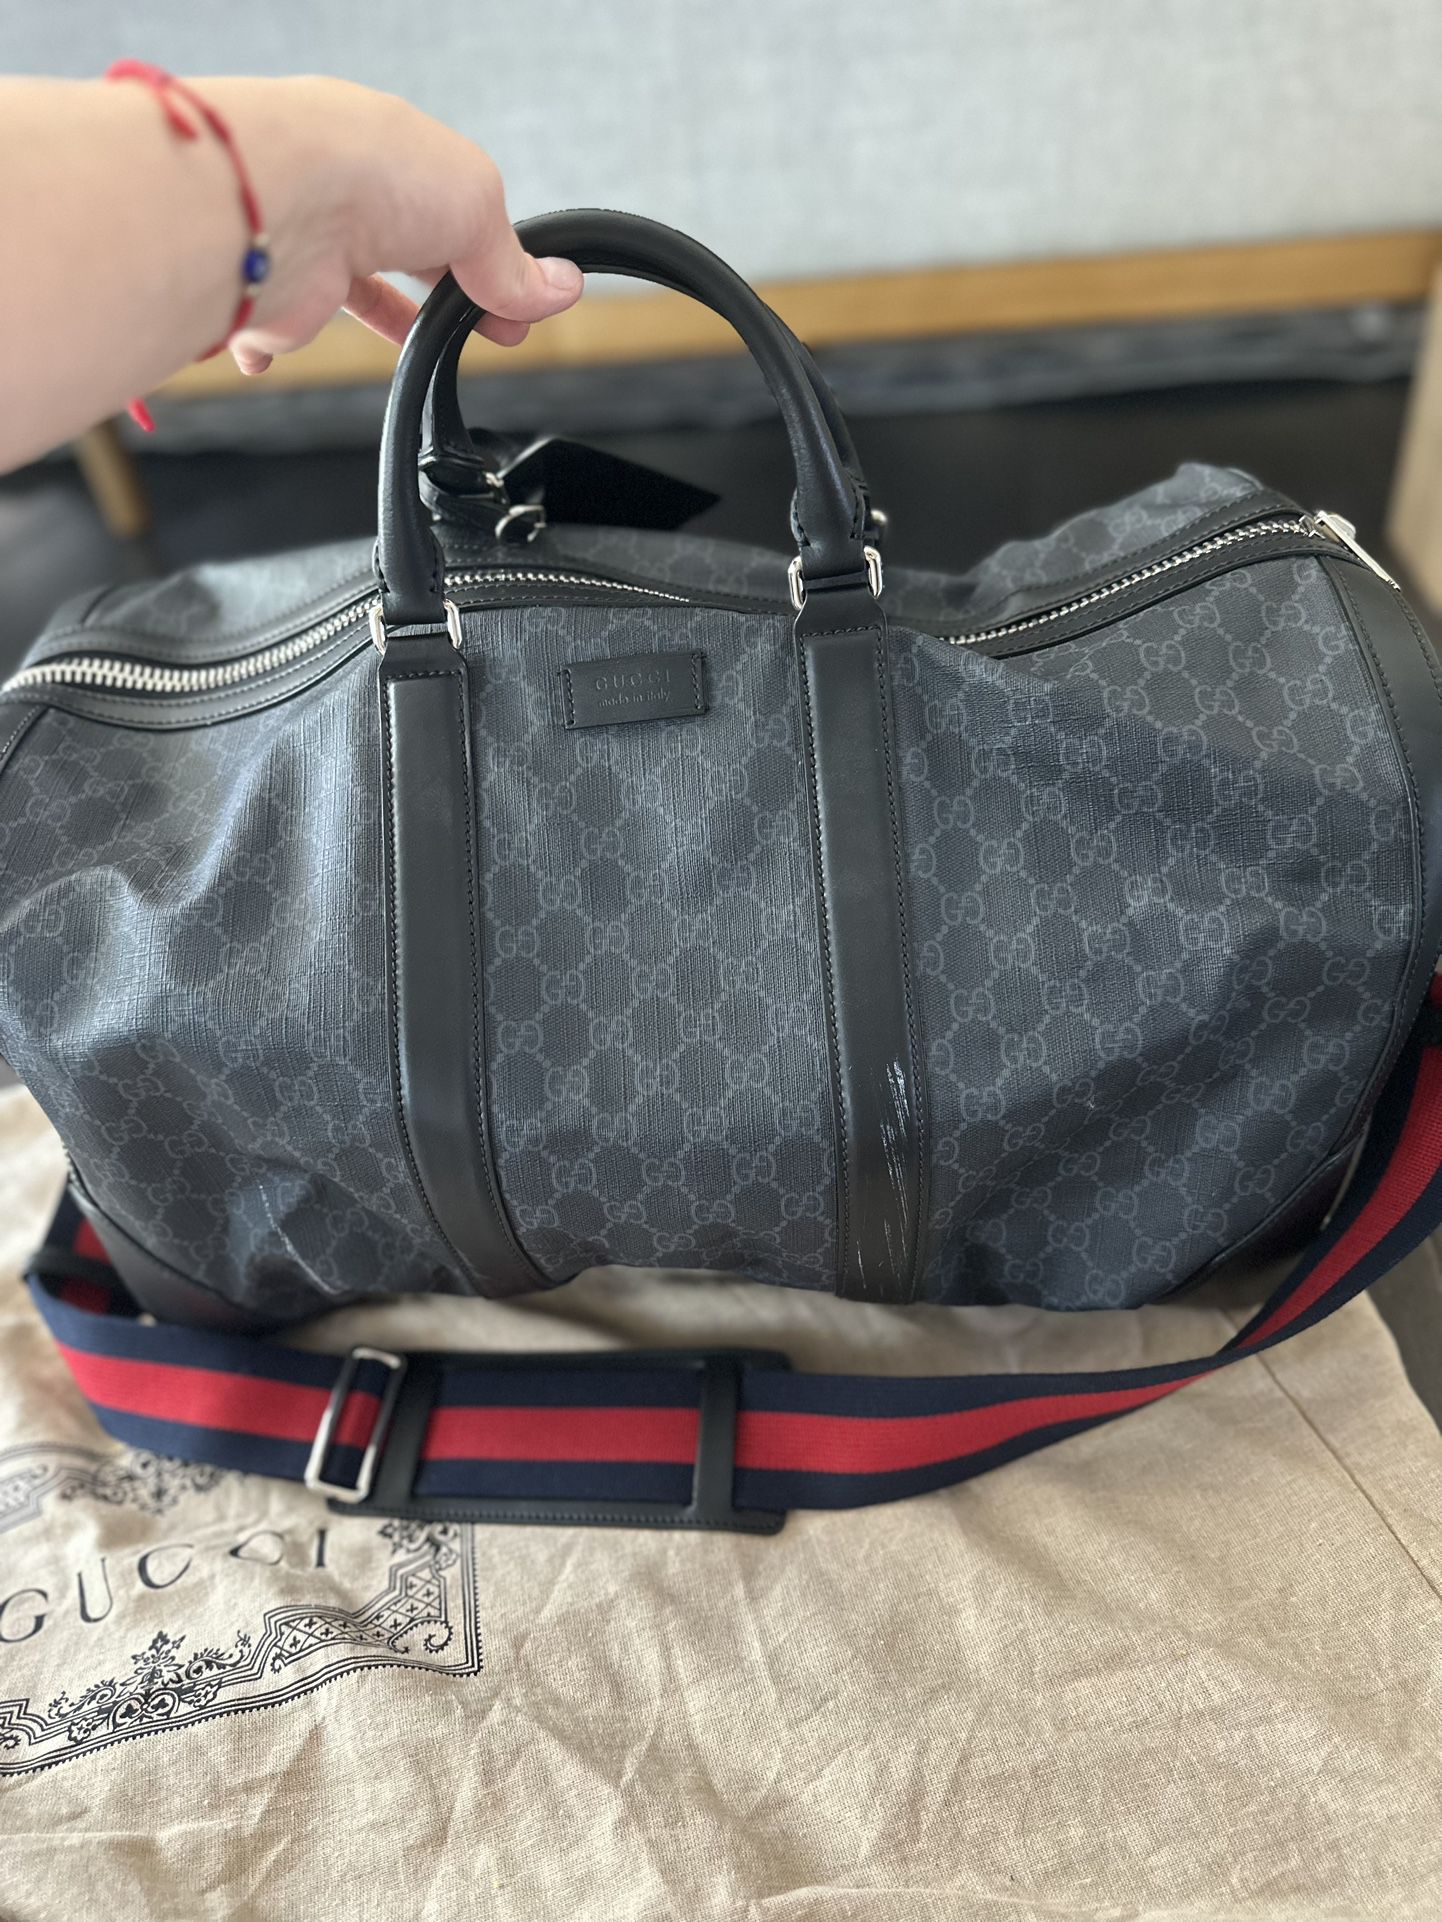 Gucci Black Carry On Duffle